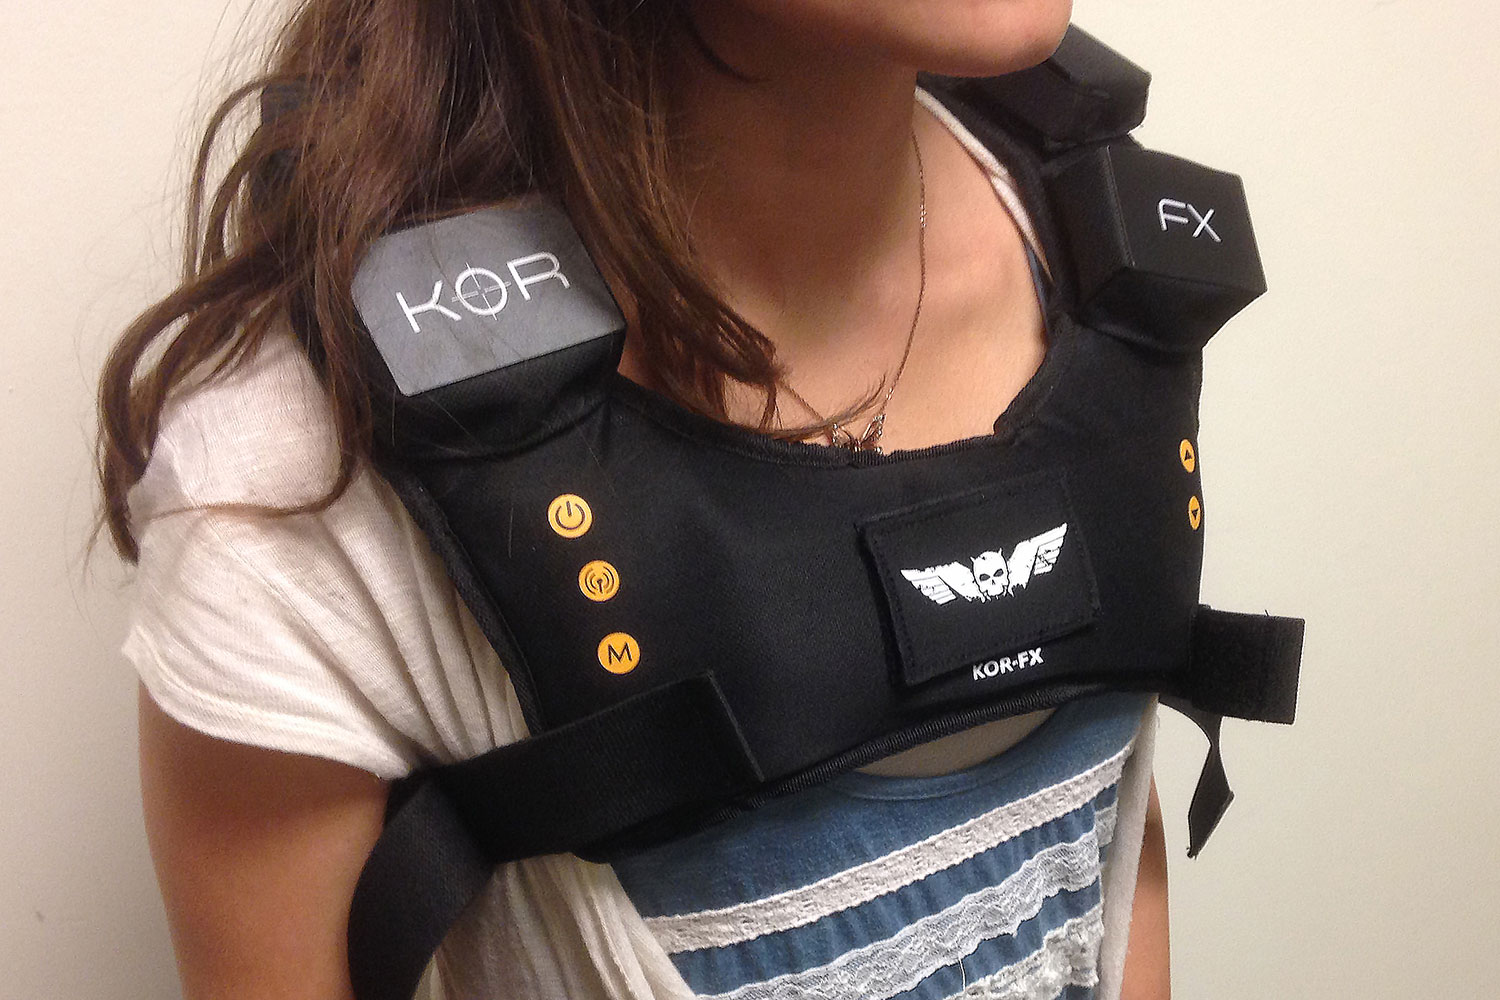 New haptic vest promises to bring further immersion to VR gaming